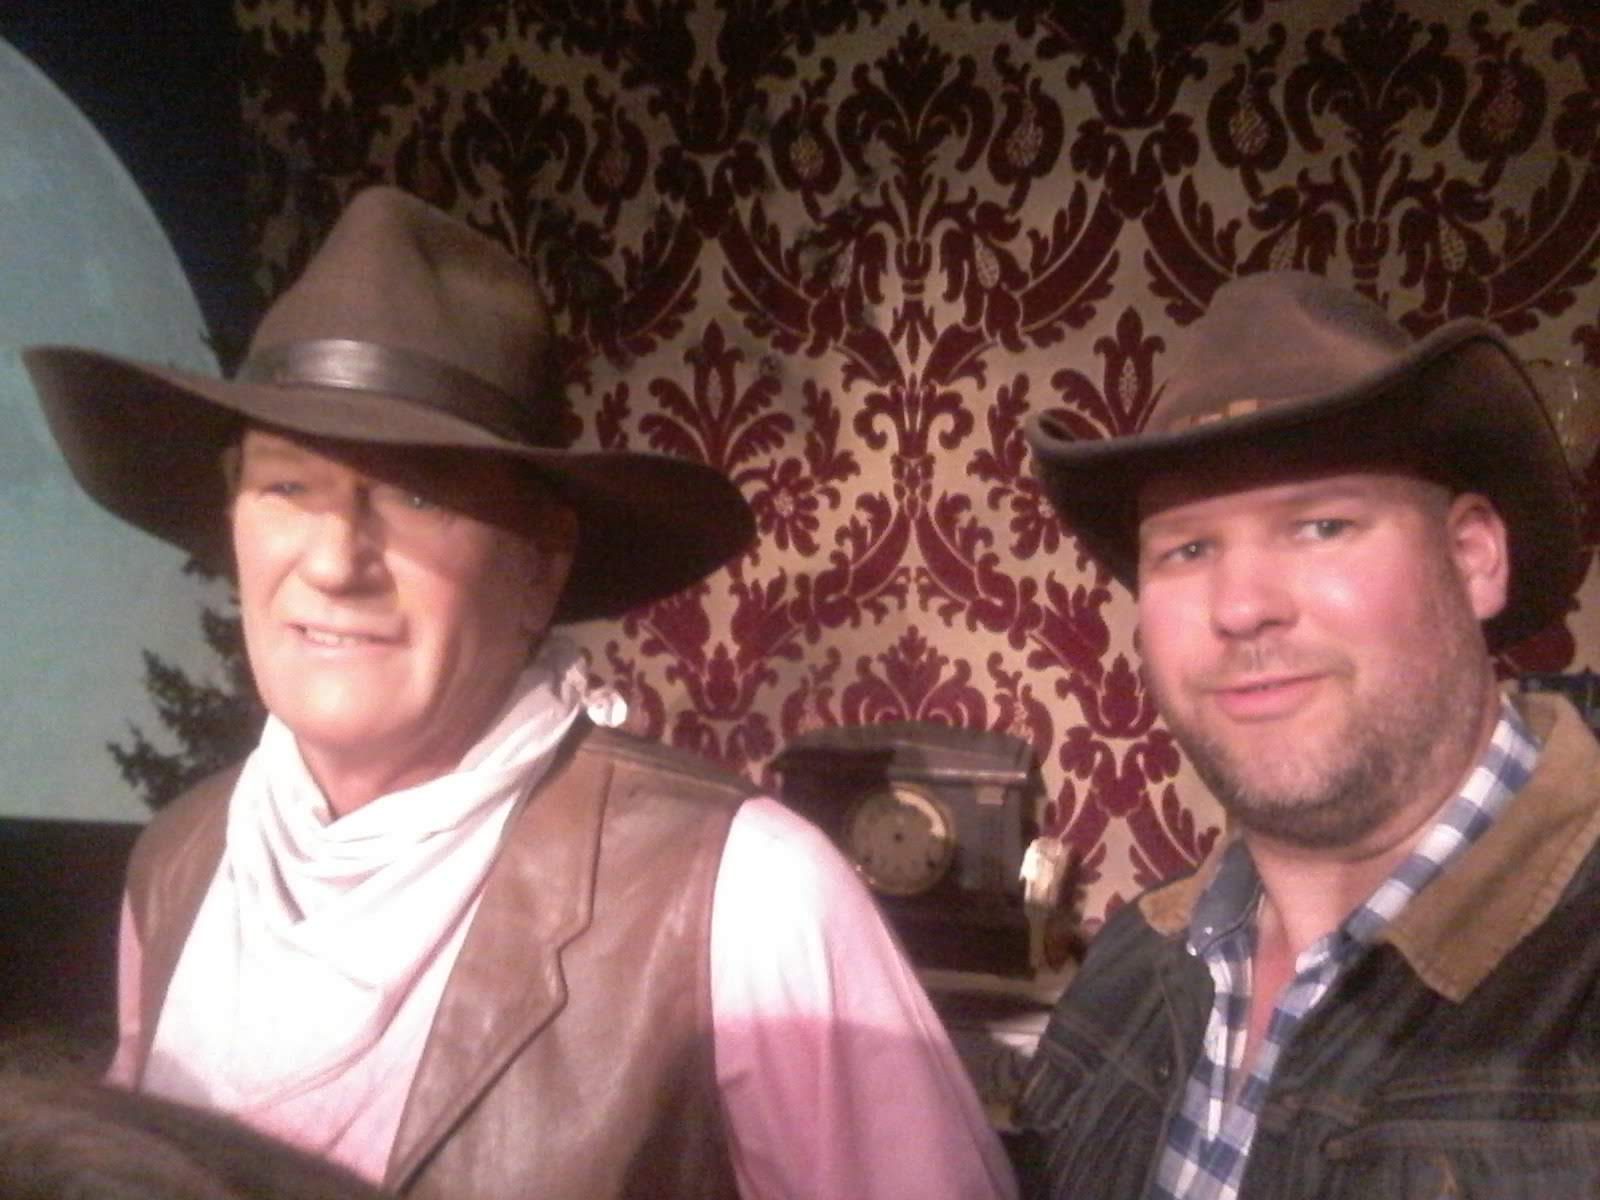 Hangin' with the Duke!